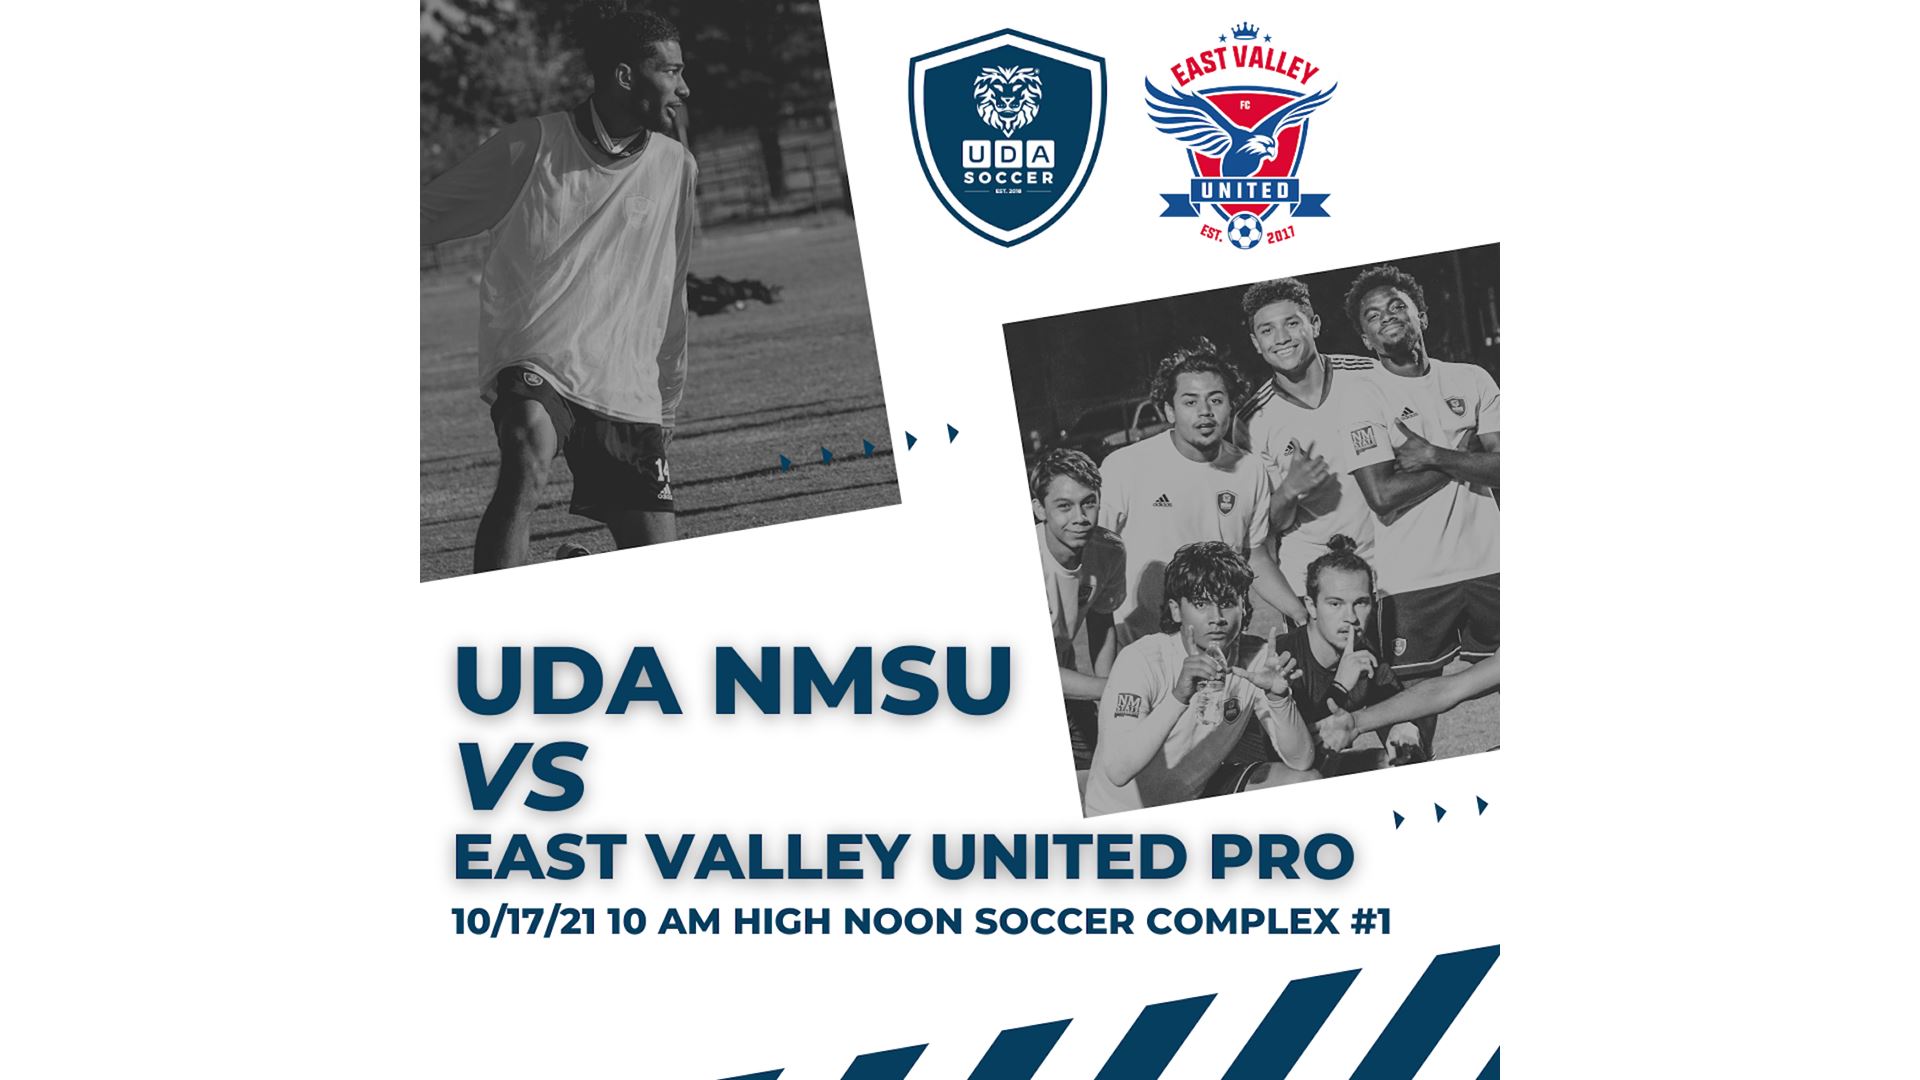 UDANMSU soccer to take on East Valley United Pro